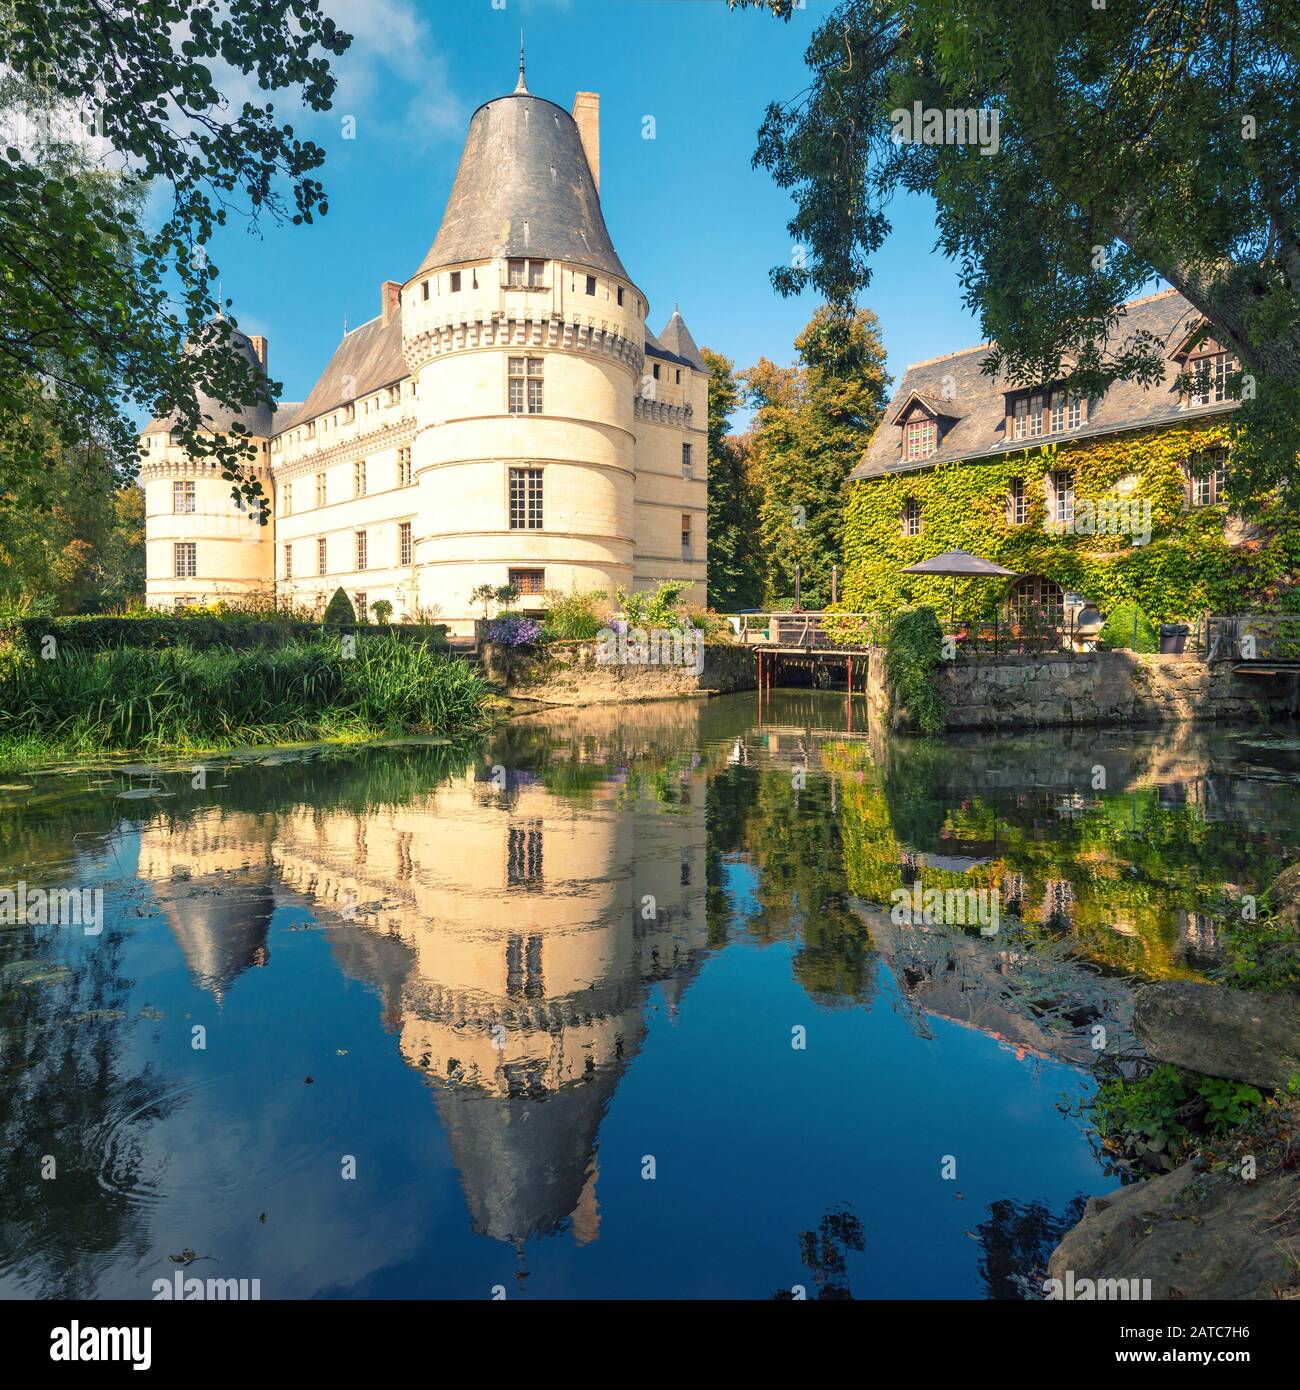 The chateau de l'Islette, France. This Renaissance castle is located in the  Loire Valley, was built in the 16th century and is a tourist attraction. Stock Photo